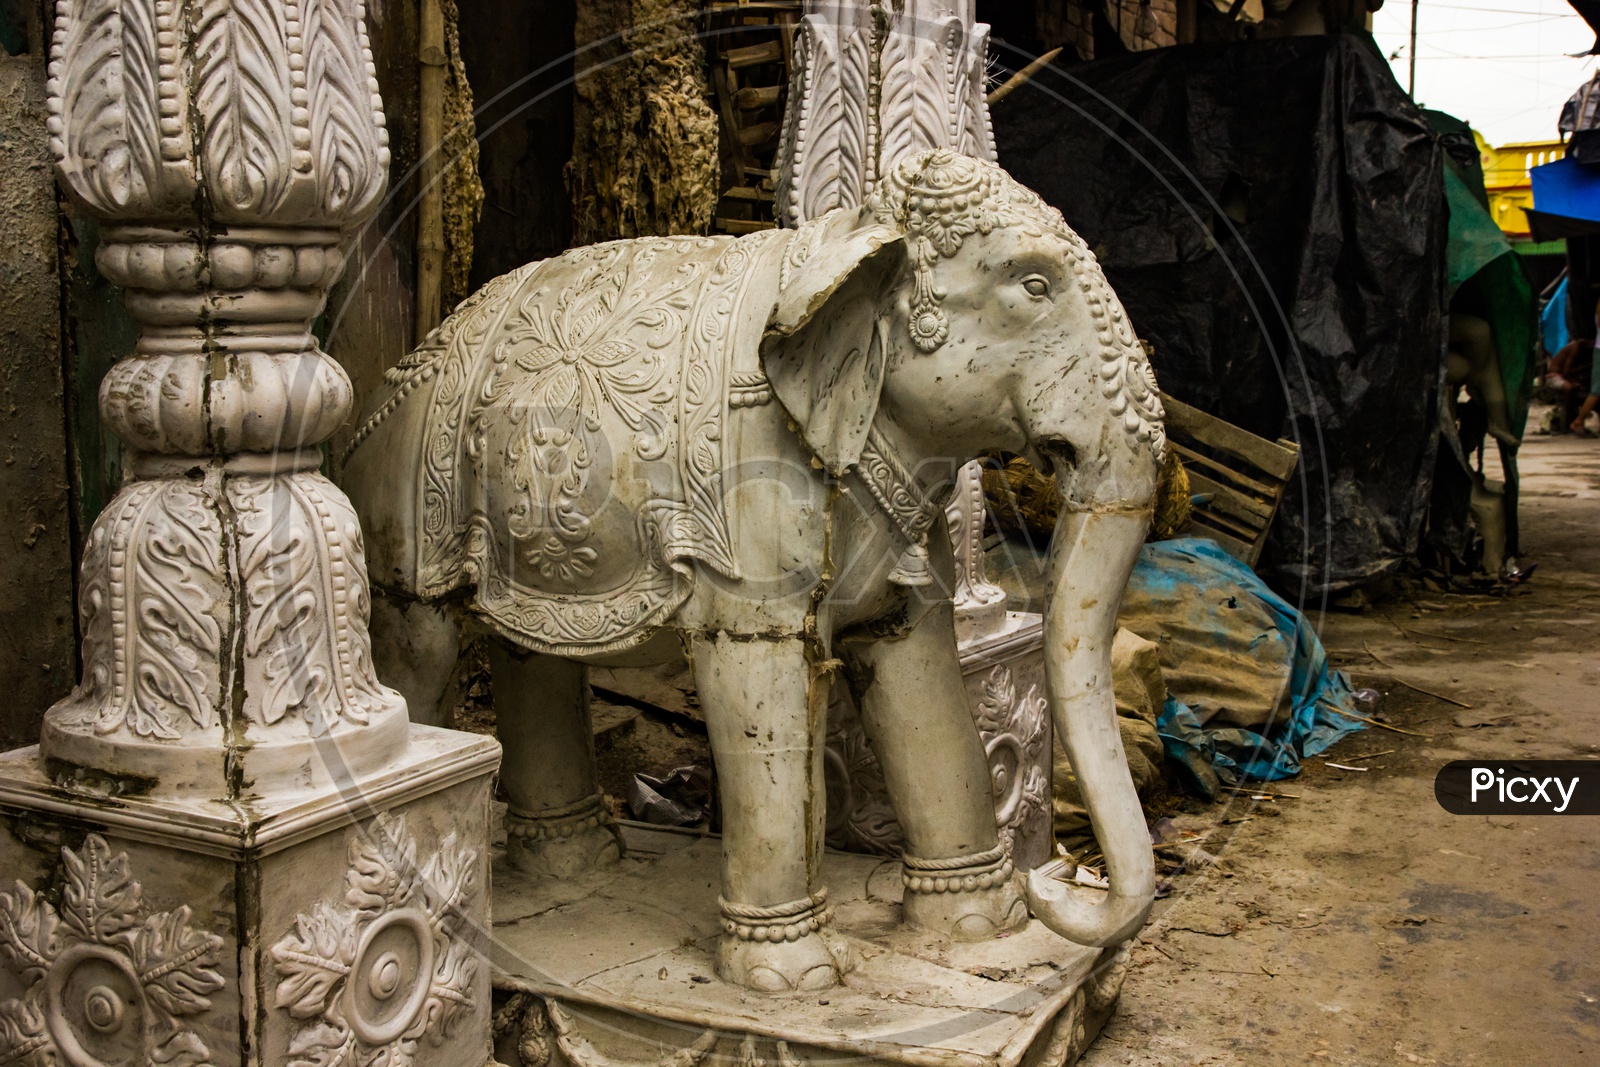 Kumartuli,West Bengal, India, July 2018. A Clay Statue Of A Elephant Under Construction At A Shop During Day Time For Sale